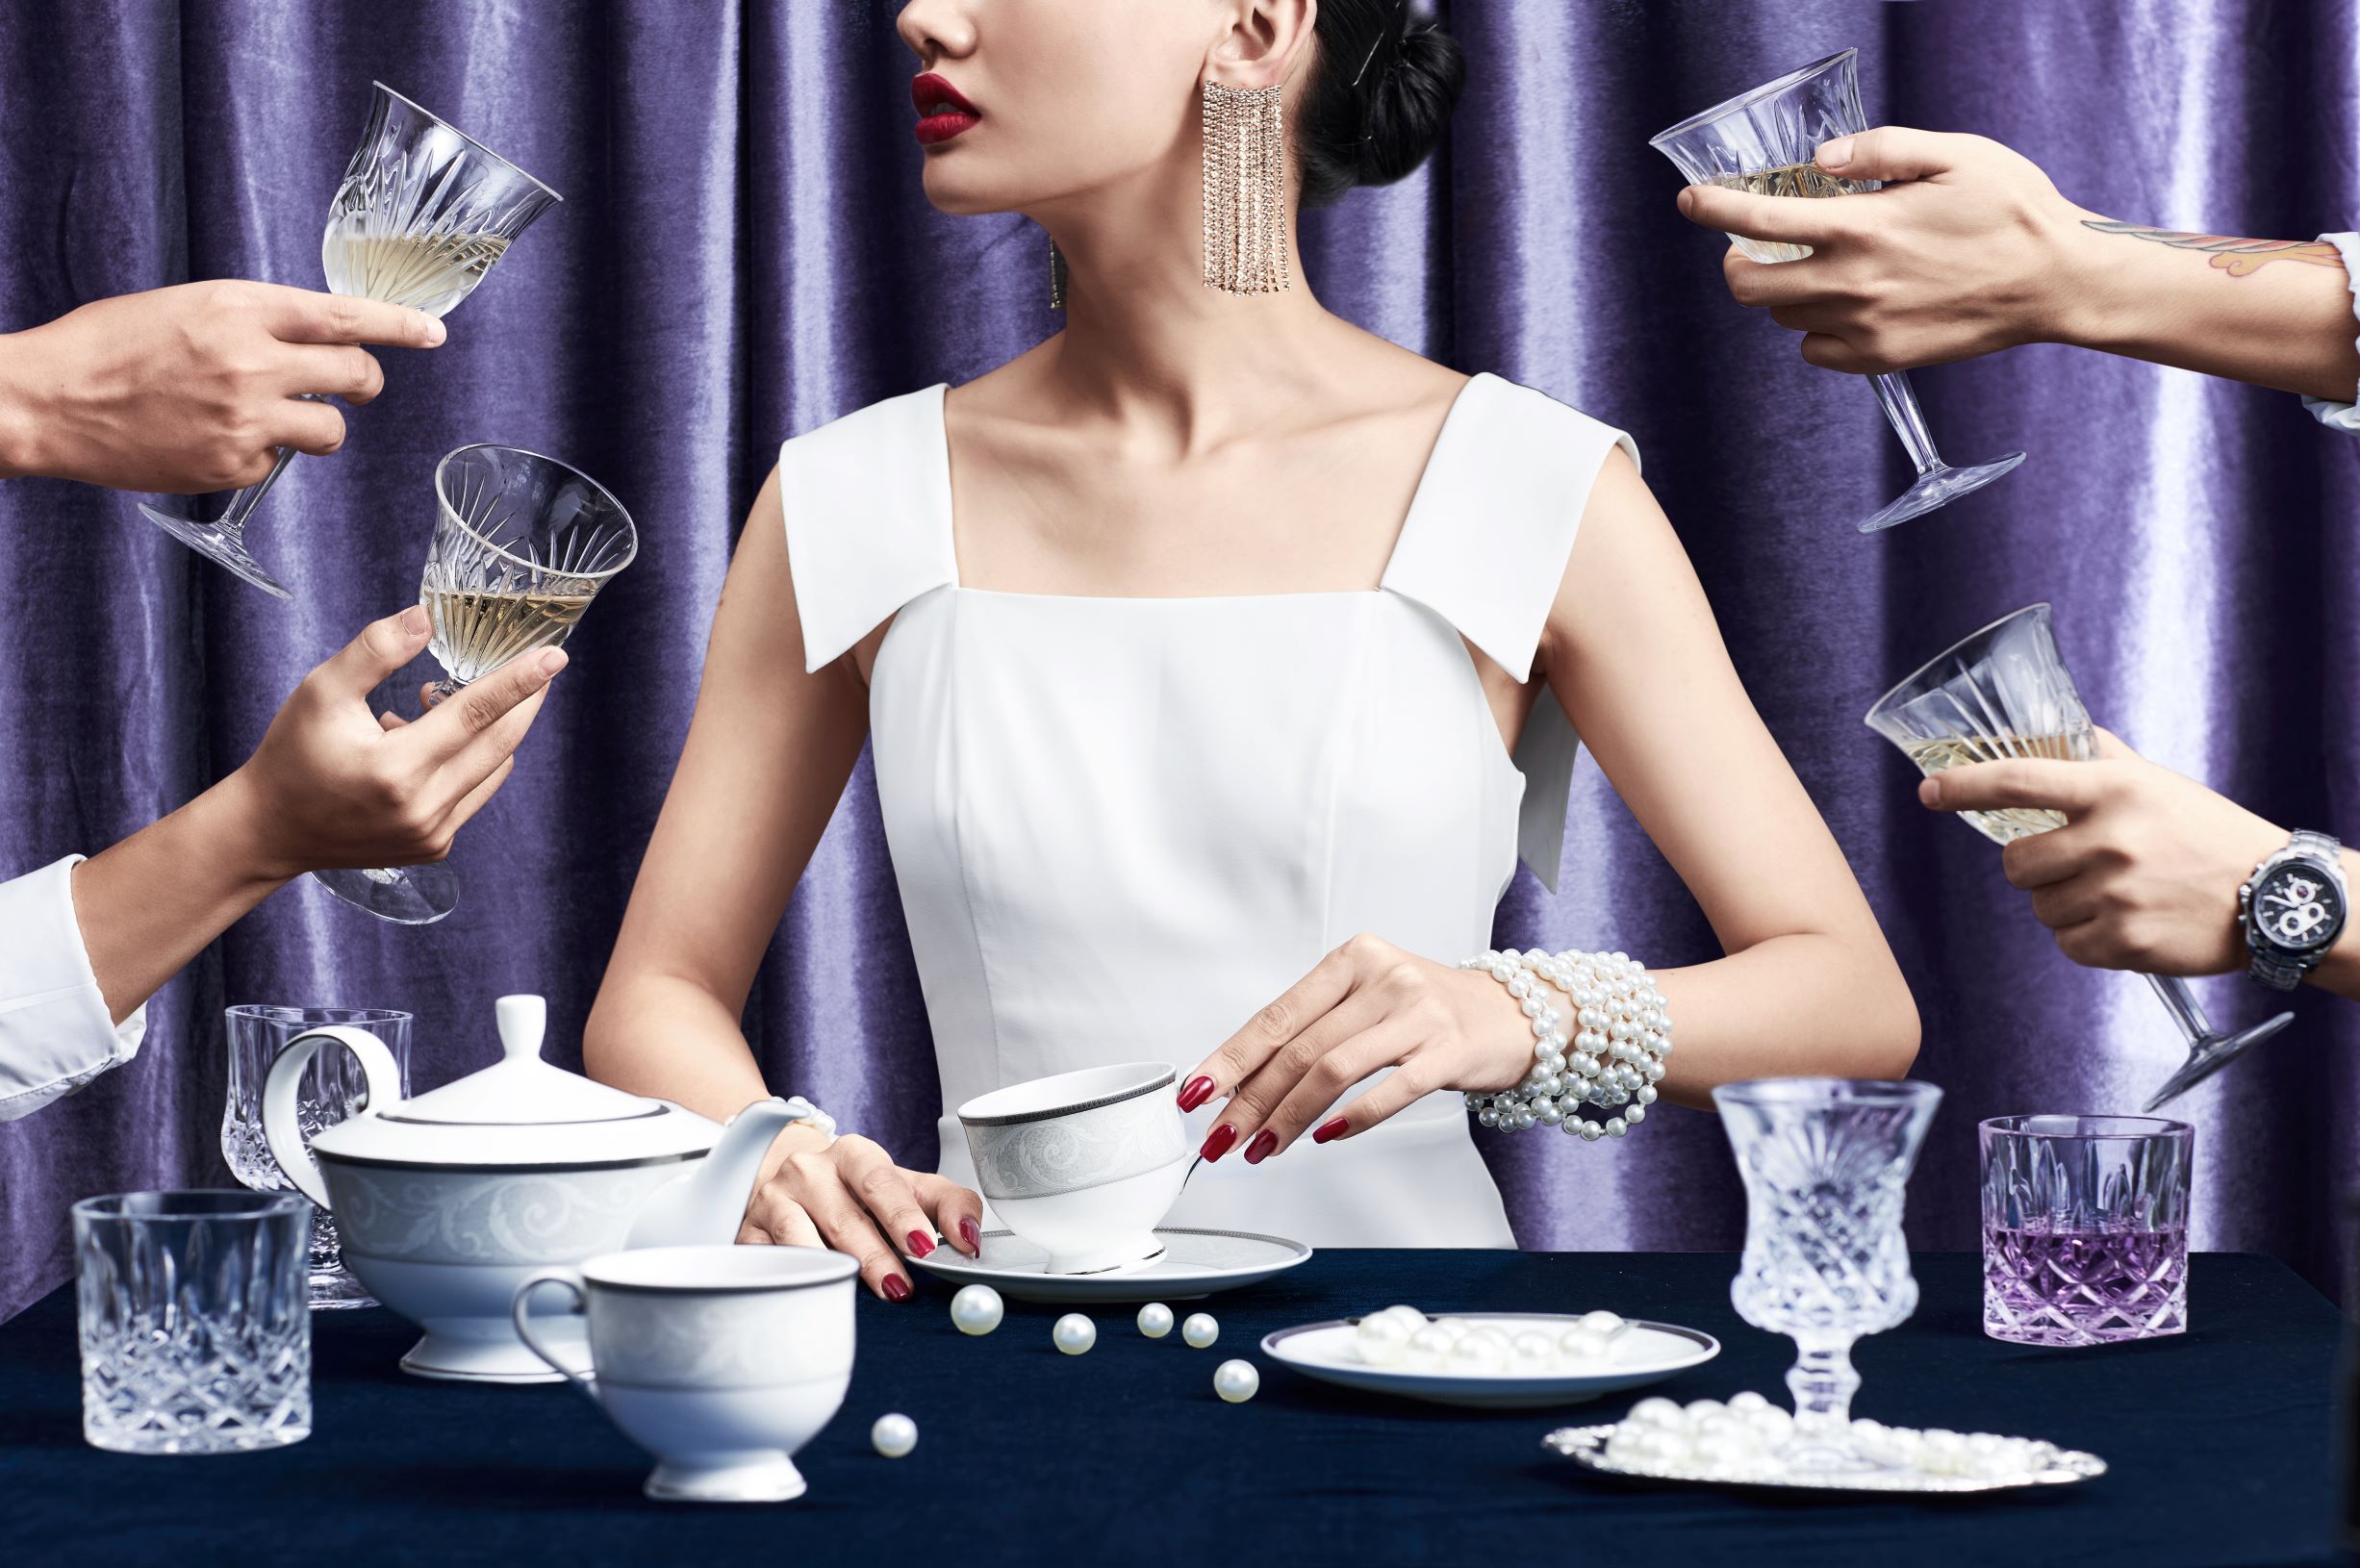 be-yourself-metropole-hanois-angelina-introduces-personality-inspired-cocktail-menu